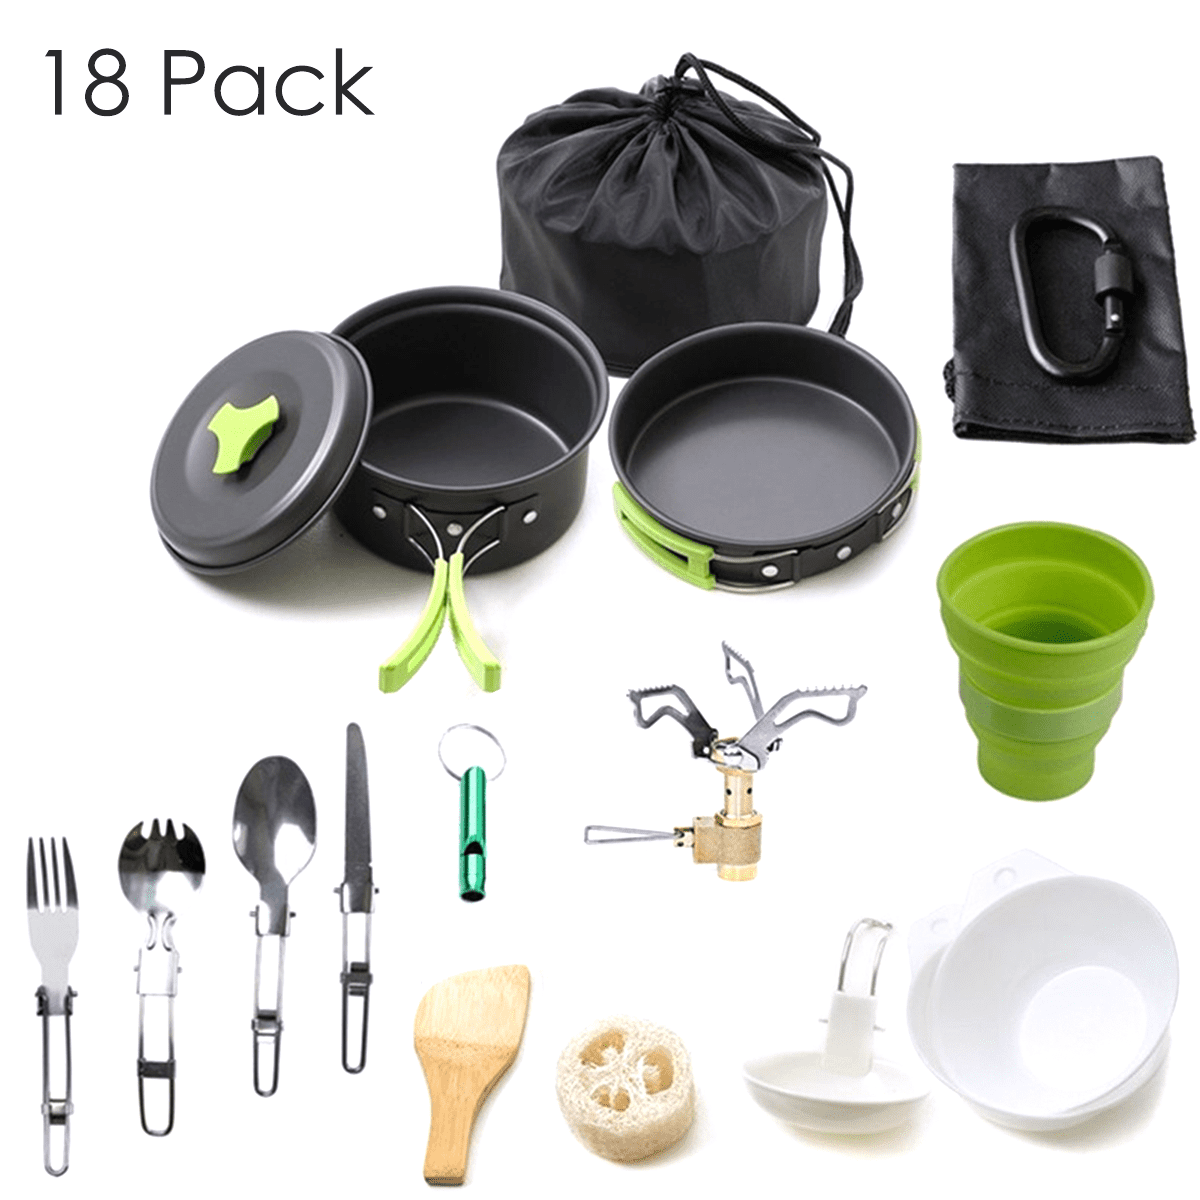 Strong and Durable Cookware Spoon Fork Camping Utensil for Outdoors Camping 